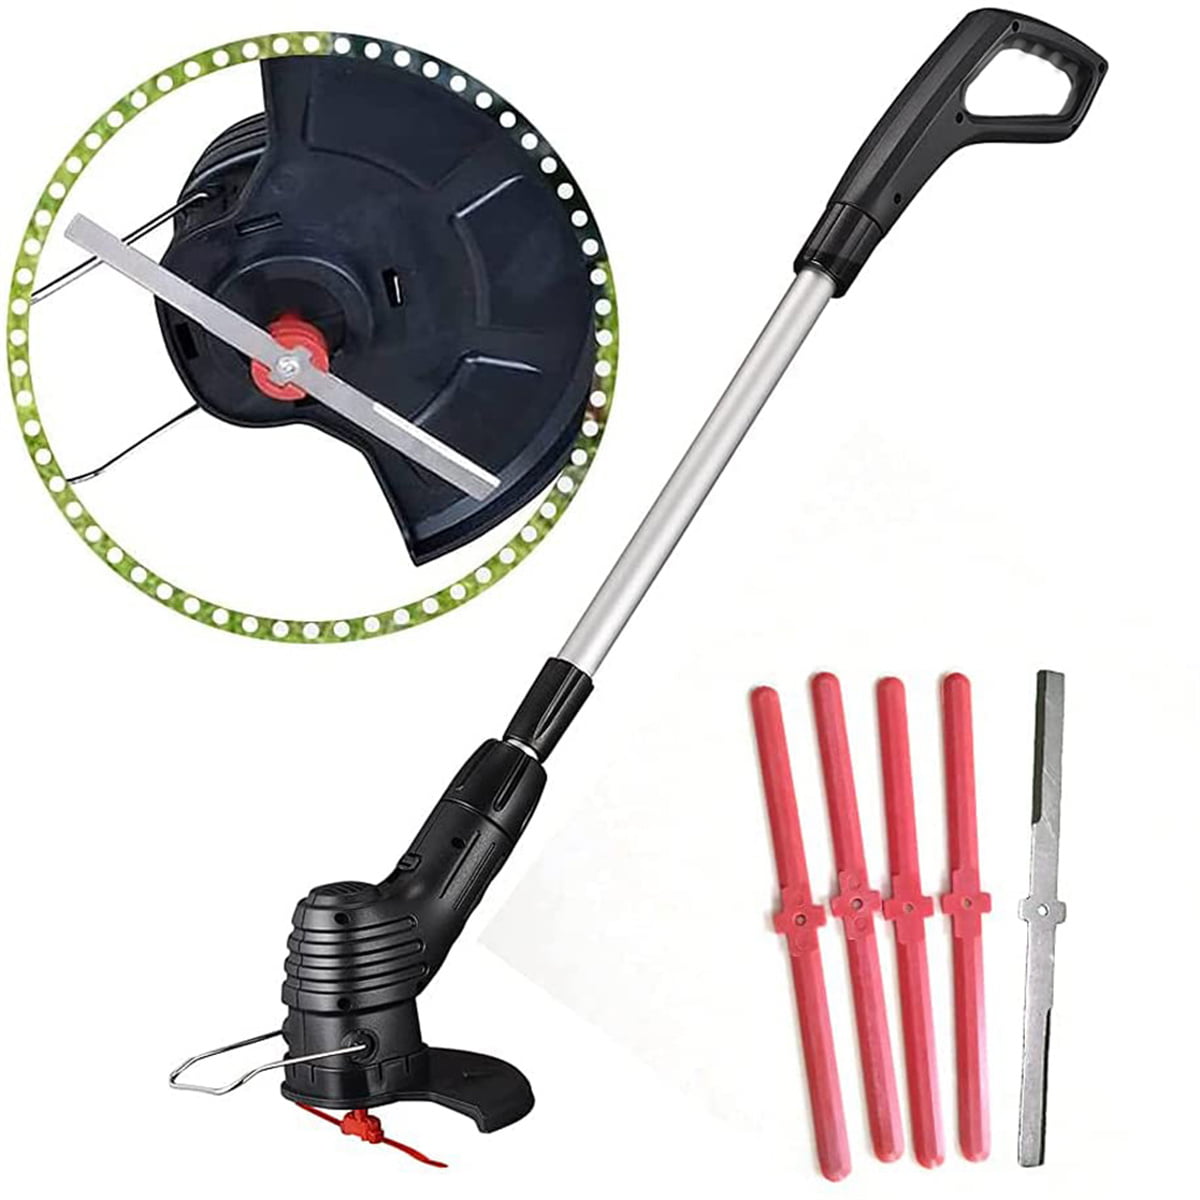 Patio Driveway Garden Gear Electric Weed Killer Burner with Nozzle up to 650 Degree Weeder Tool for Garden Thermal Weeding Stick